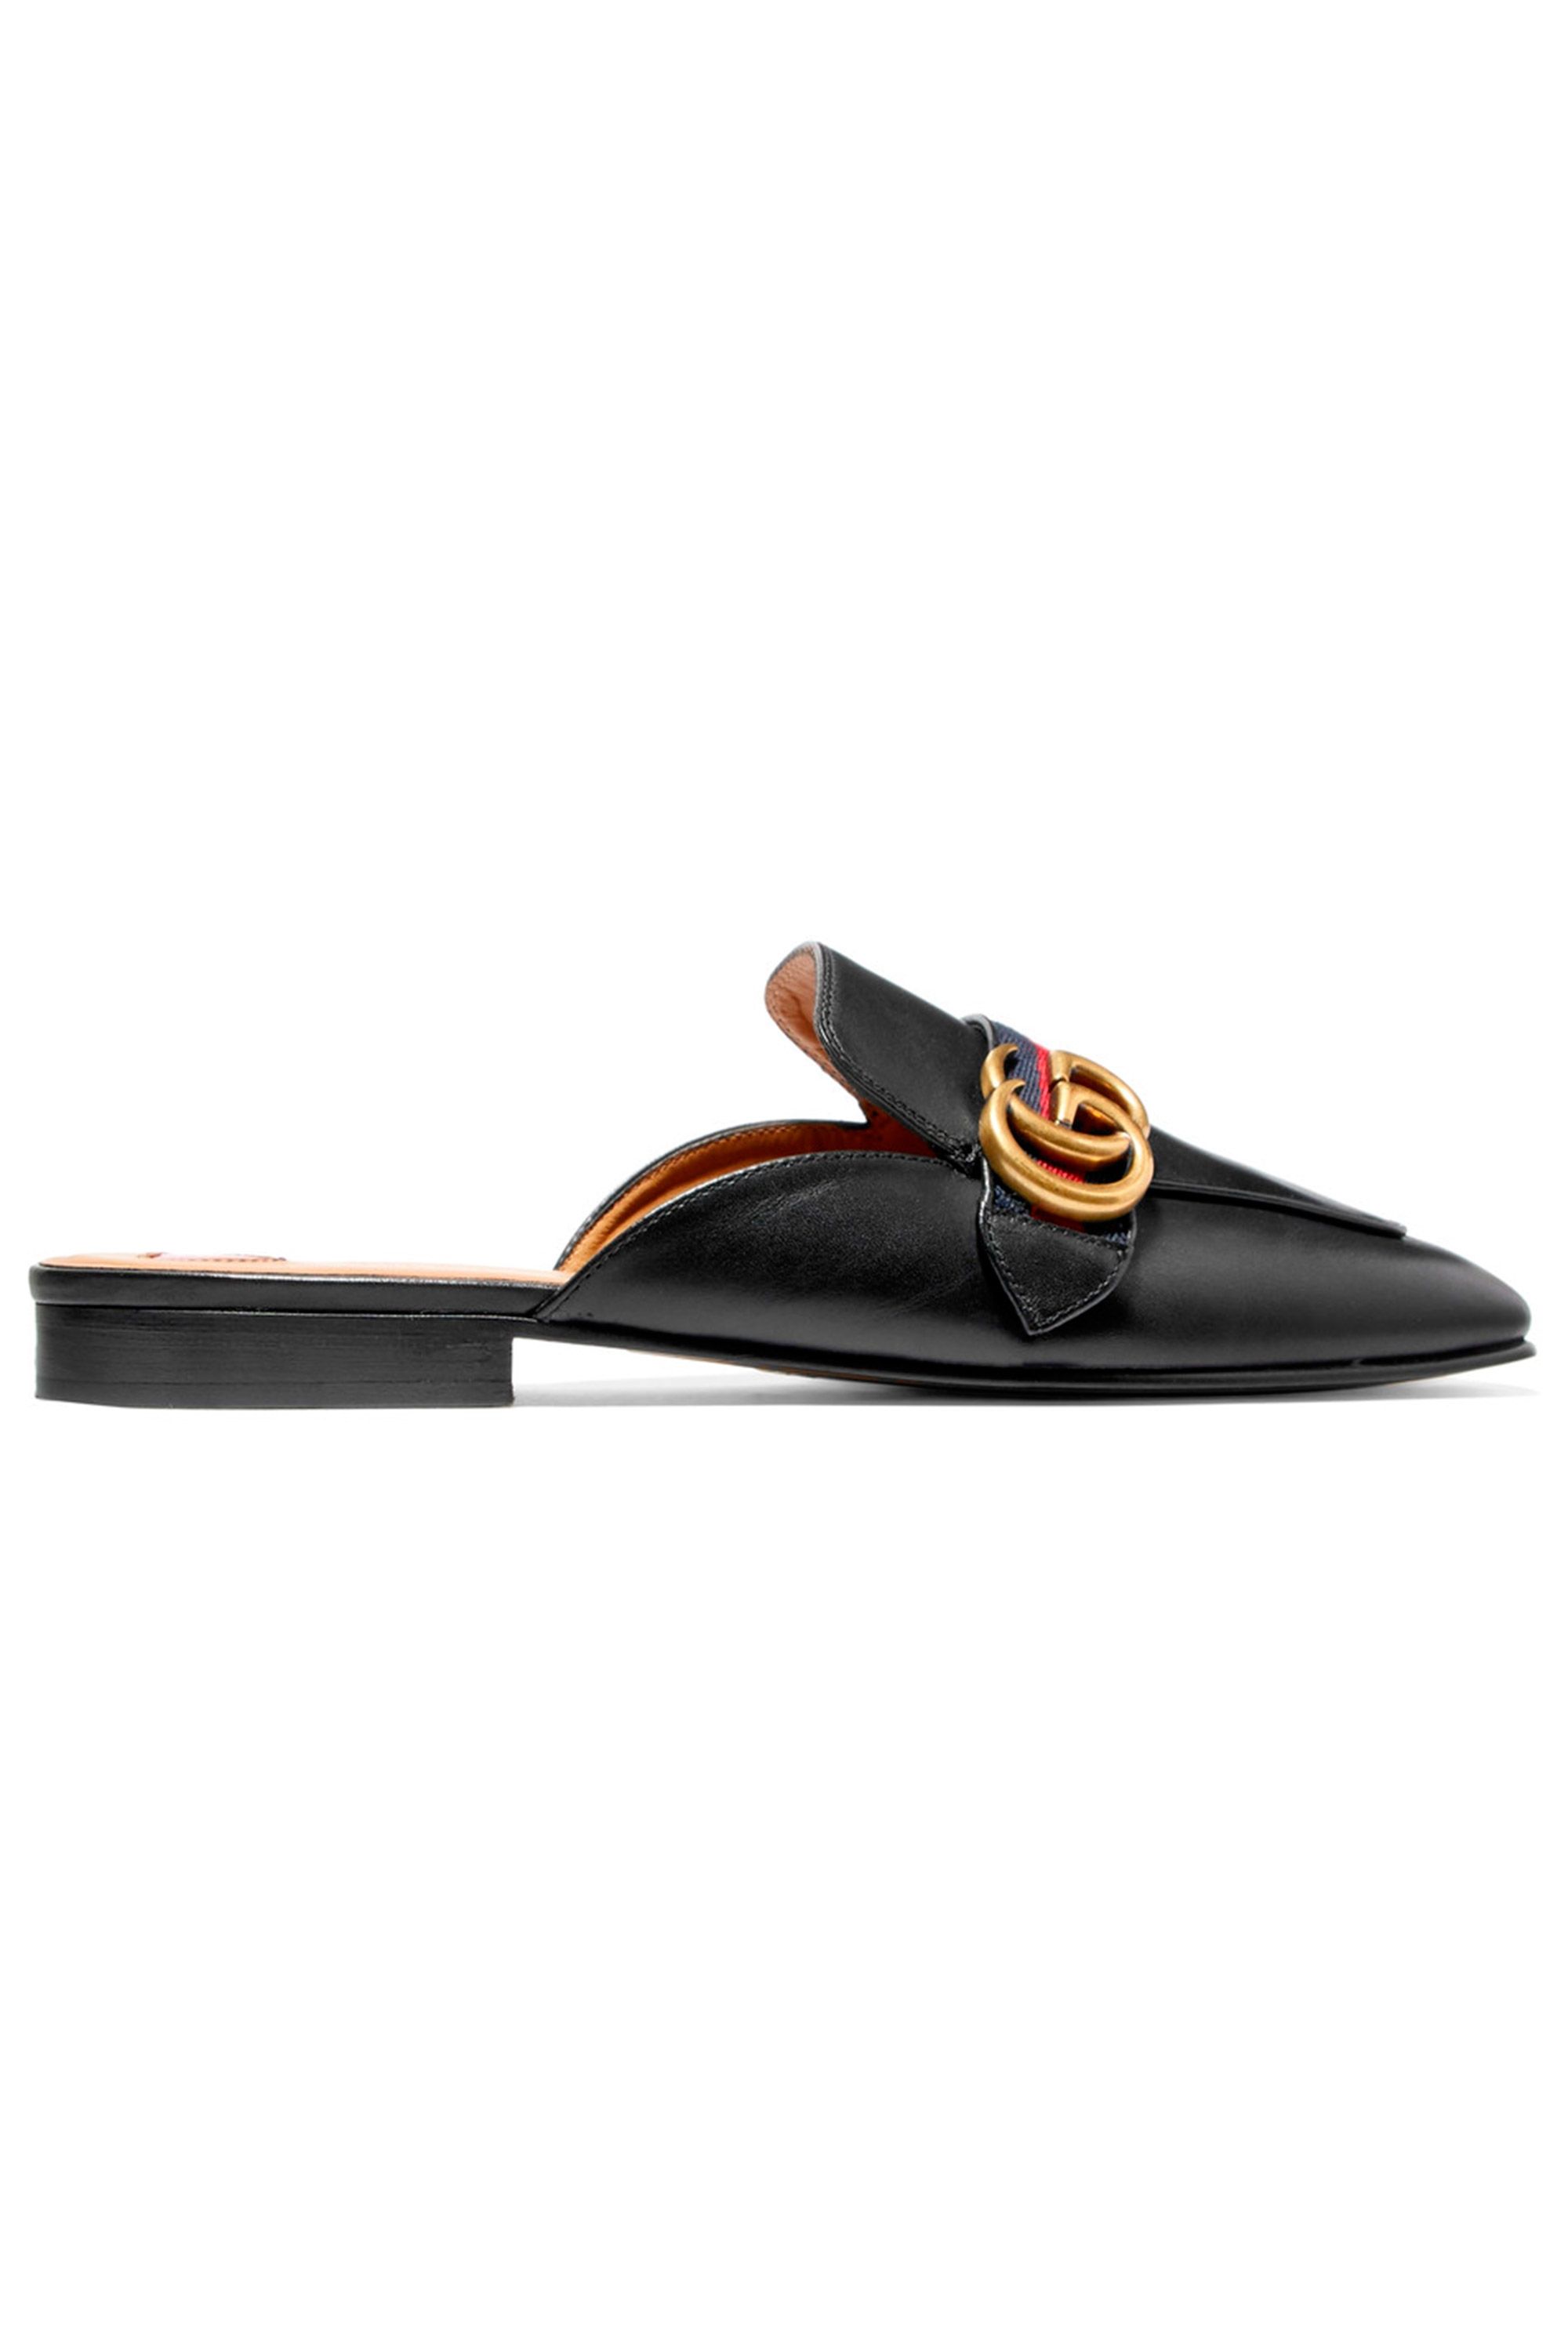 gucci backless loafers womens